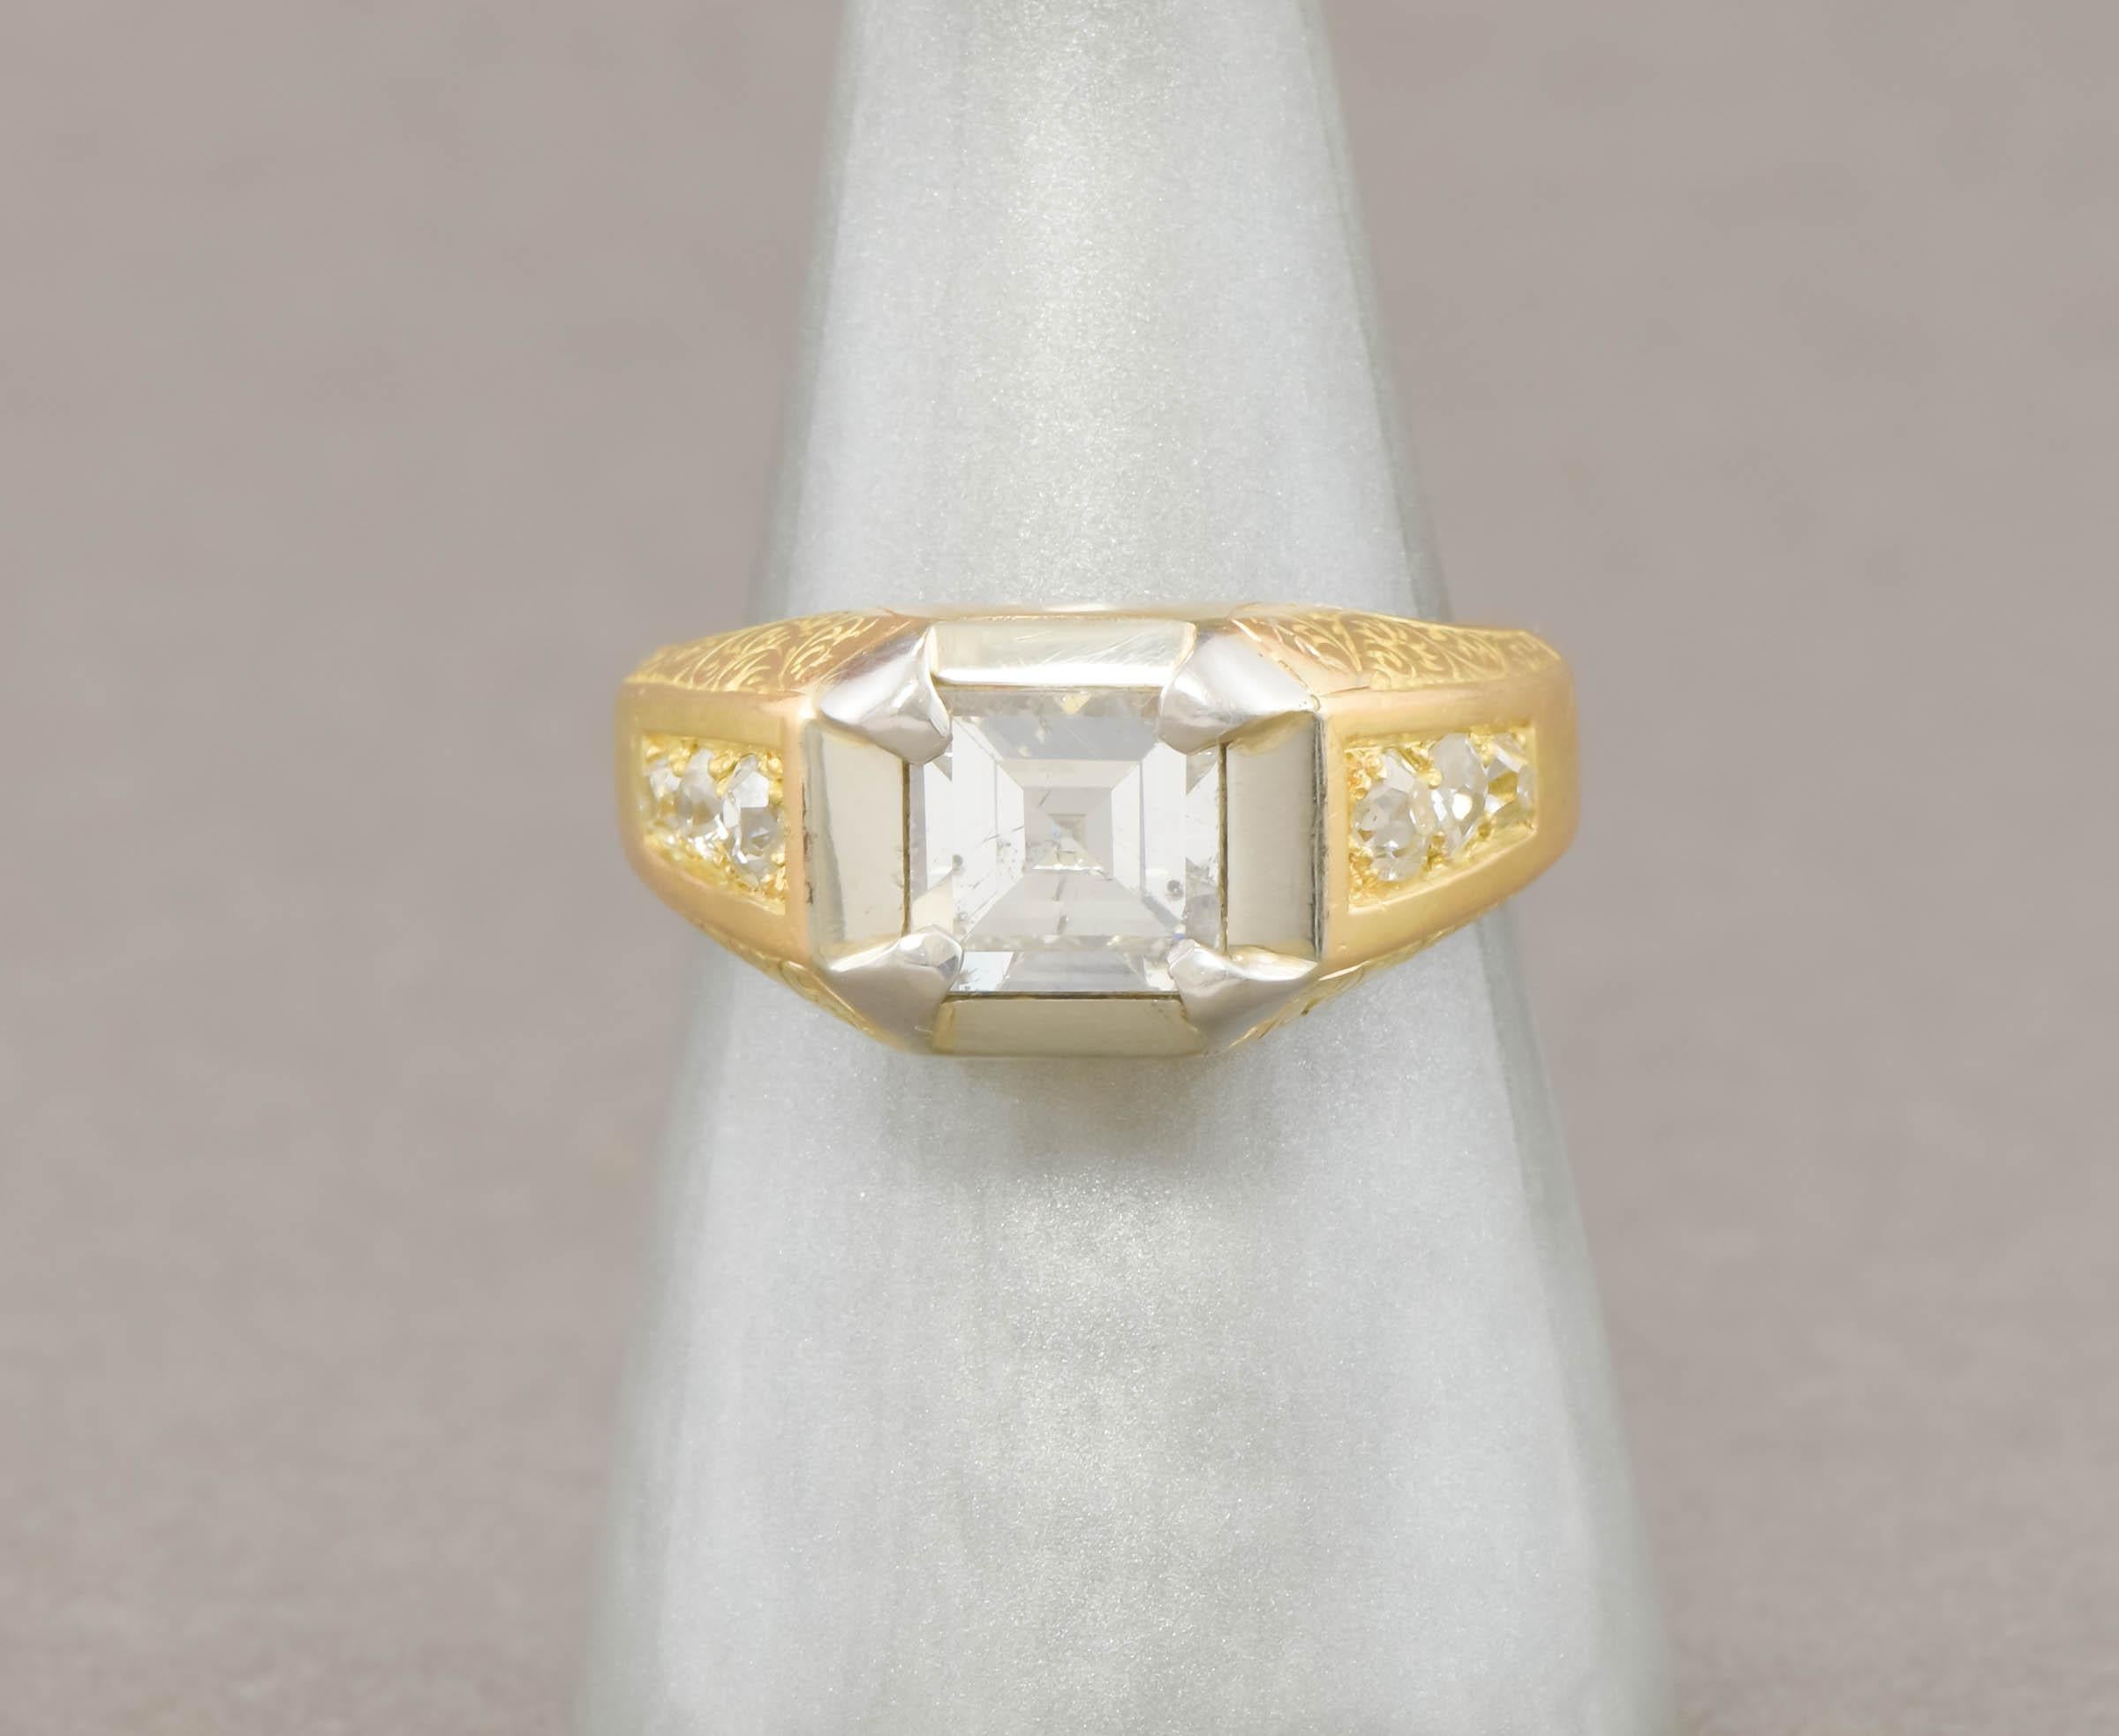 Offered is a vintage, heavy 18K gold French ring with a large, sparkly square step cut diamond center, and old European cut diamond shoulders.  Elegant hand engraving adorns each side of the ring, with the center stone set off by platinum.  The